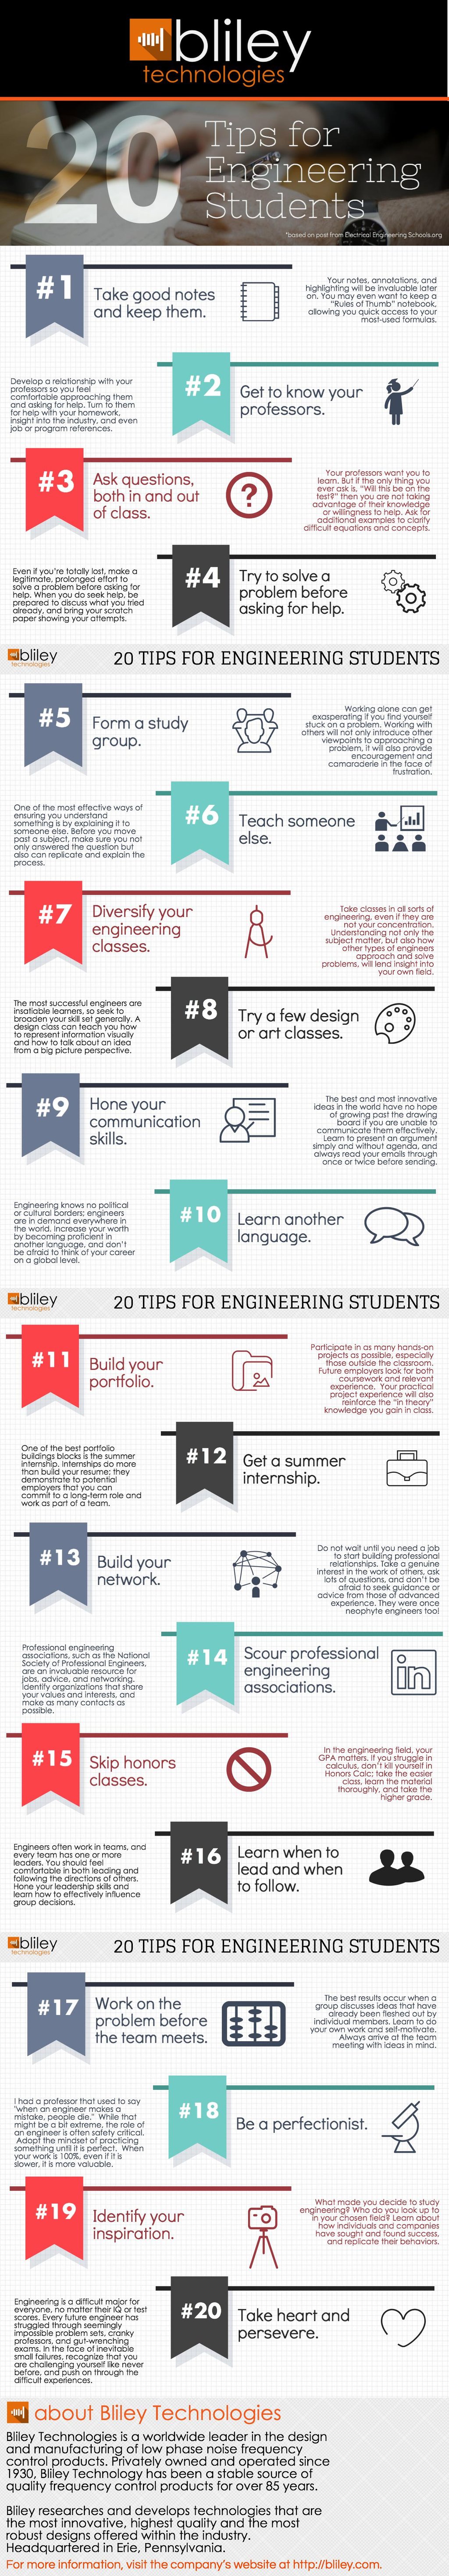 20-tips-for-engineering-students.jpeg